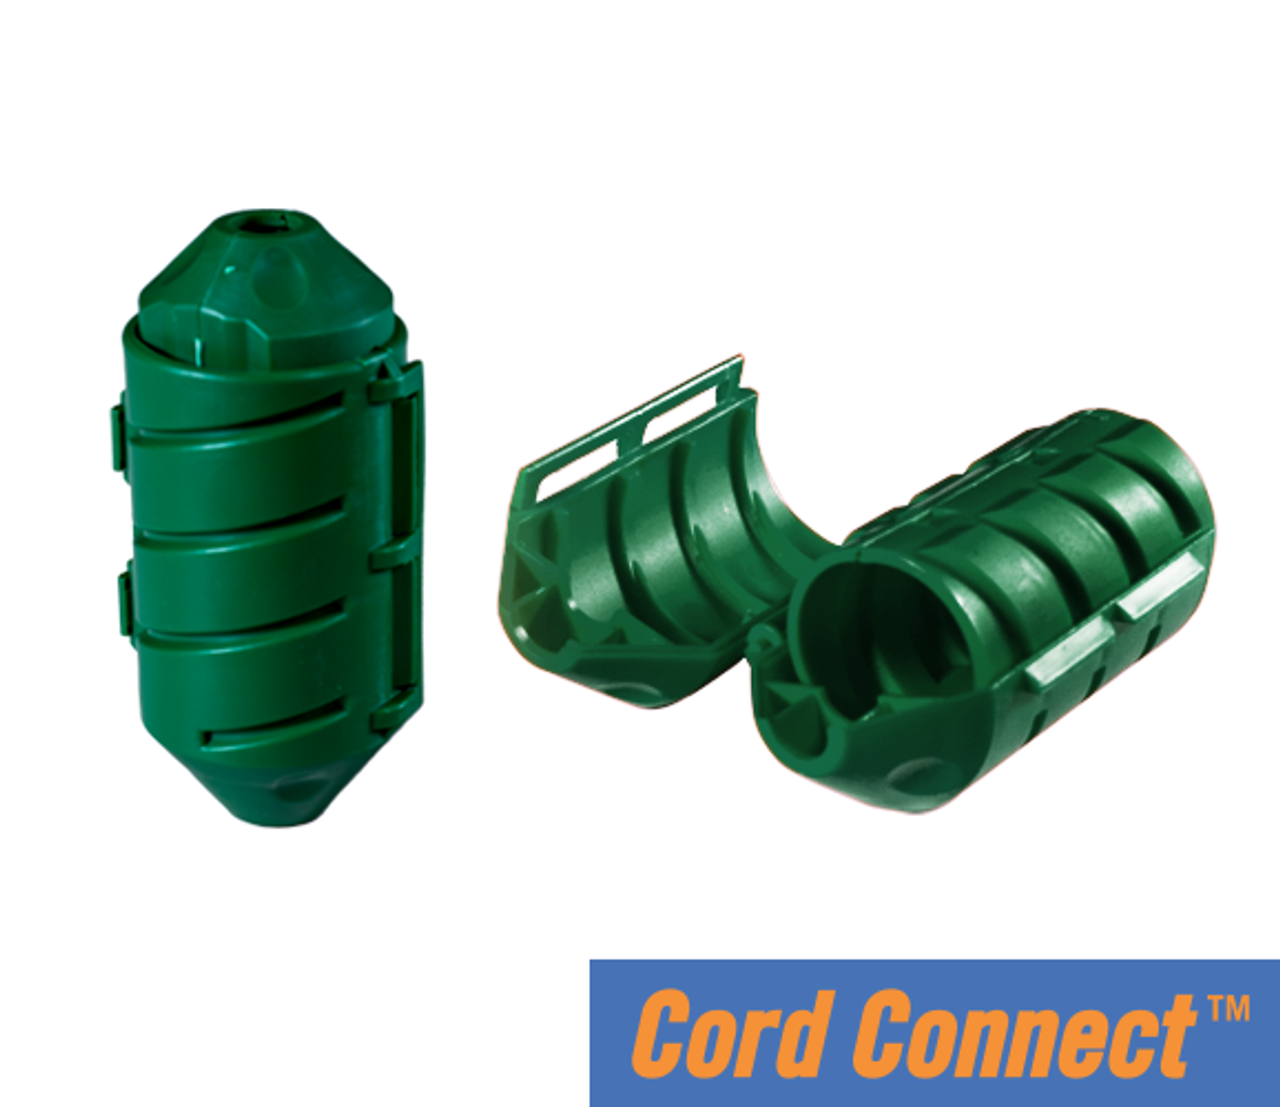 Cord Connect Water-Tight Cord Lock - Green - 1 Piece